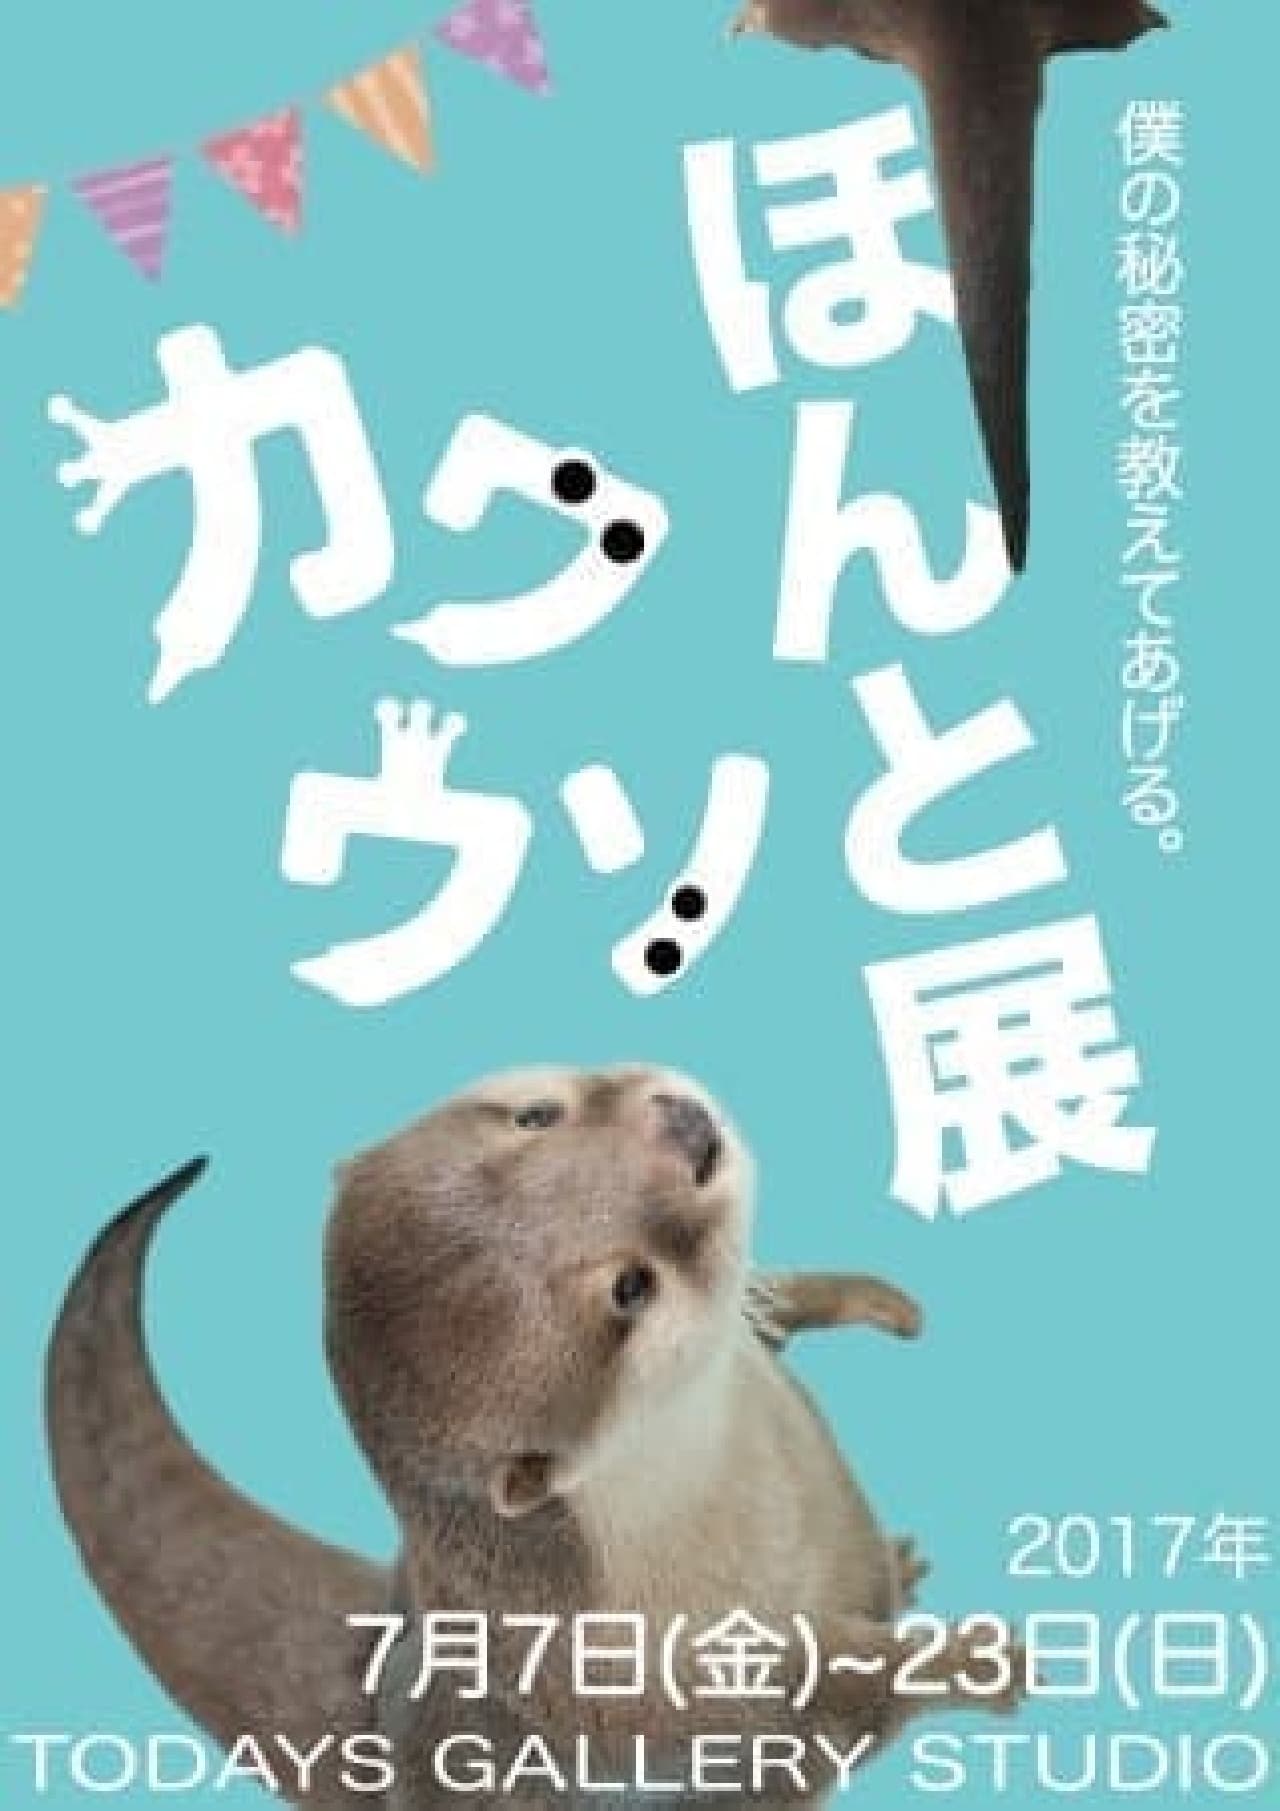 Otter Joint Photo & Product Sales Exhibition "Otter Real Exhibition"